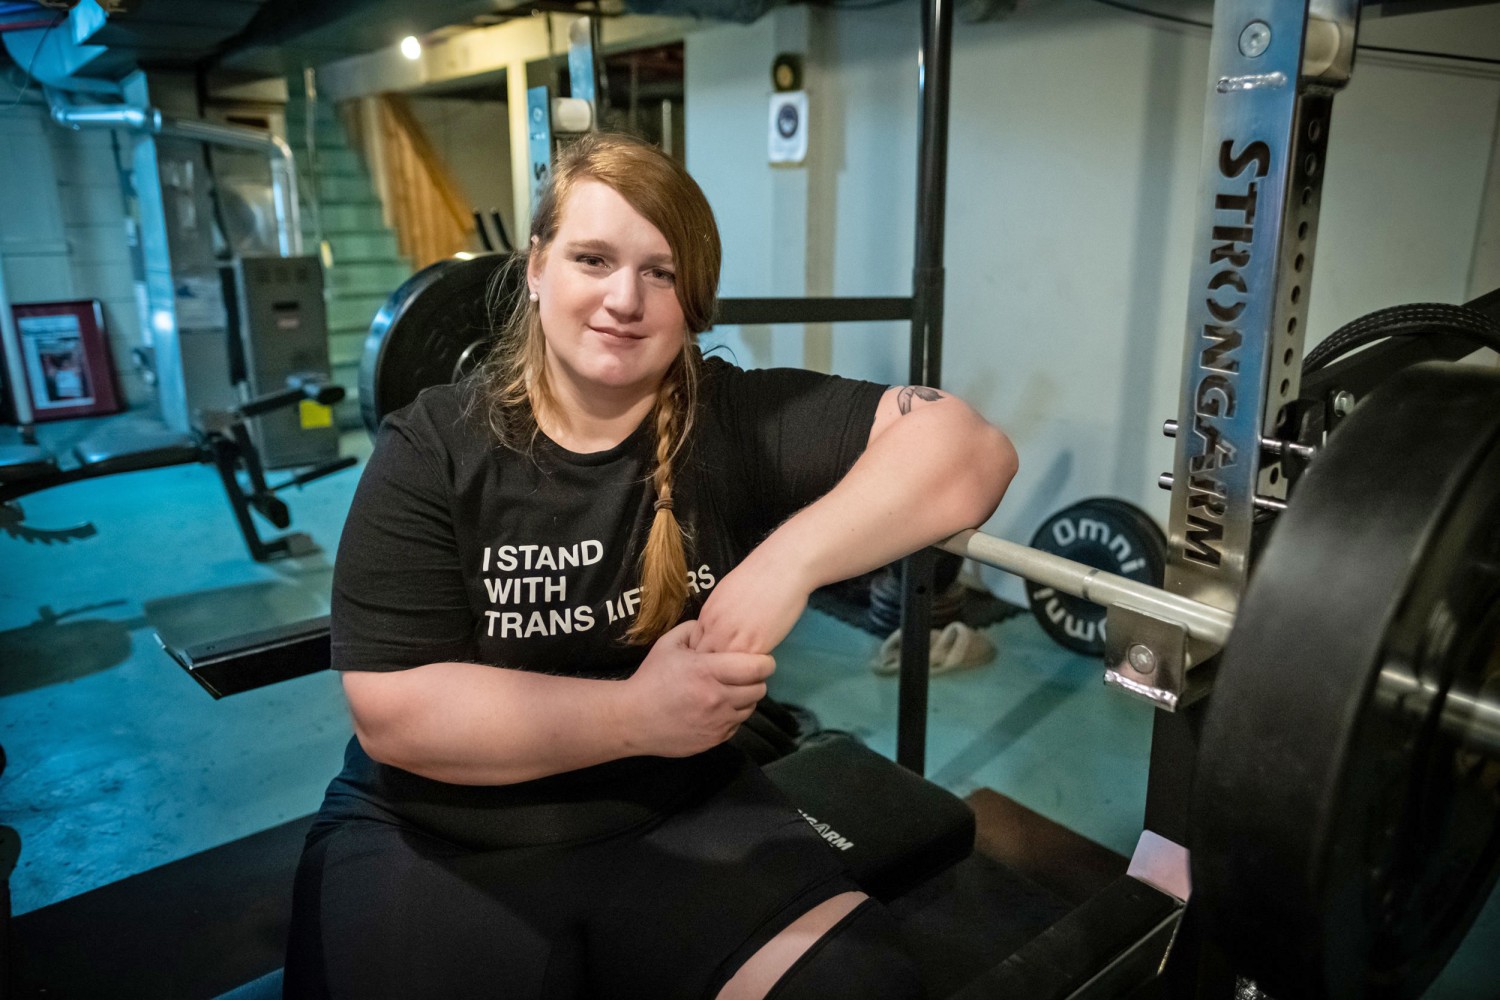 400 pound man who identifies as and competes as a woman insults women's  powerlifting. You can't make this up.